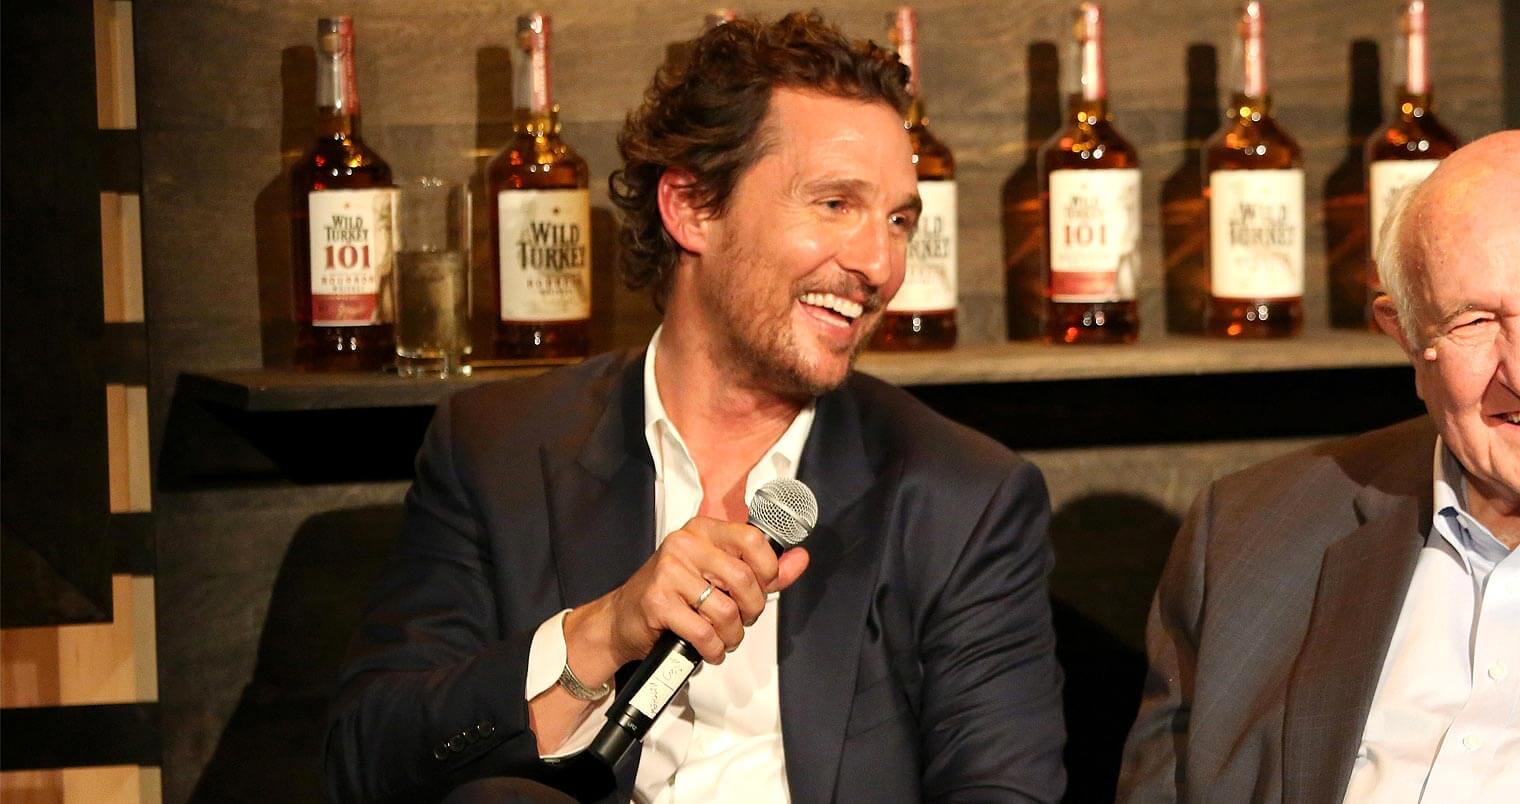 Wild Turkey and Matthew McConaughey Launch Global Advertising Campaign, featured image